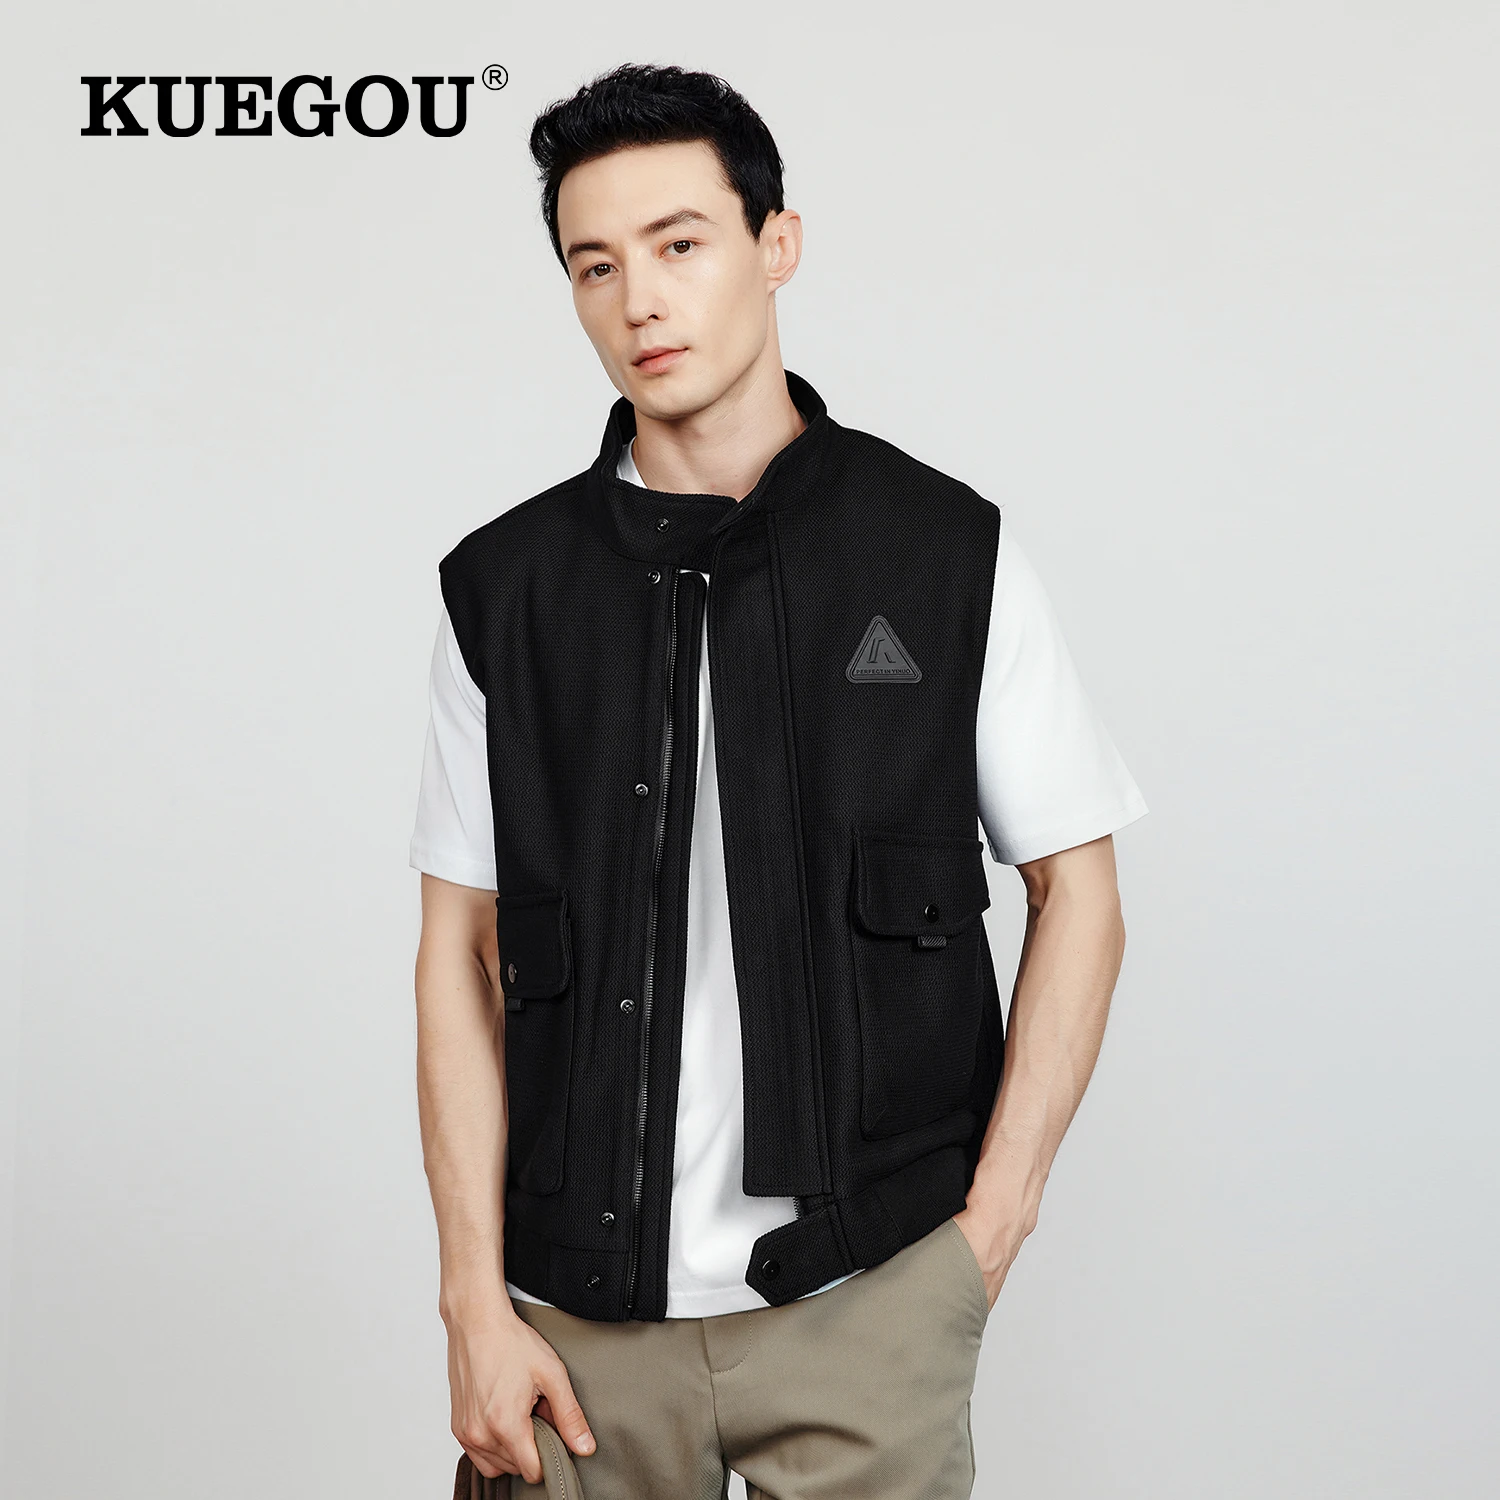 

KUEGOU 2022 Autumn Black Casual Jacket Vest Men And Coats For Outwear Japanese Streetwear Tactical Military Vintage Clothes 0673